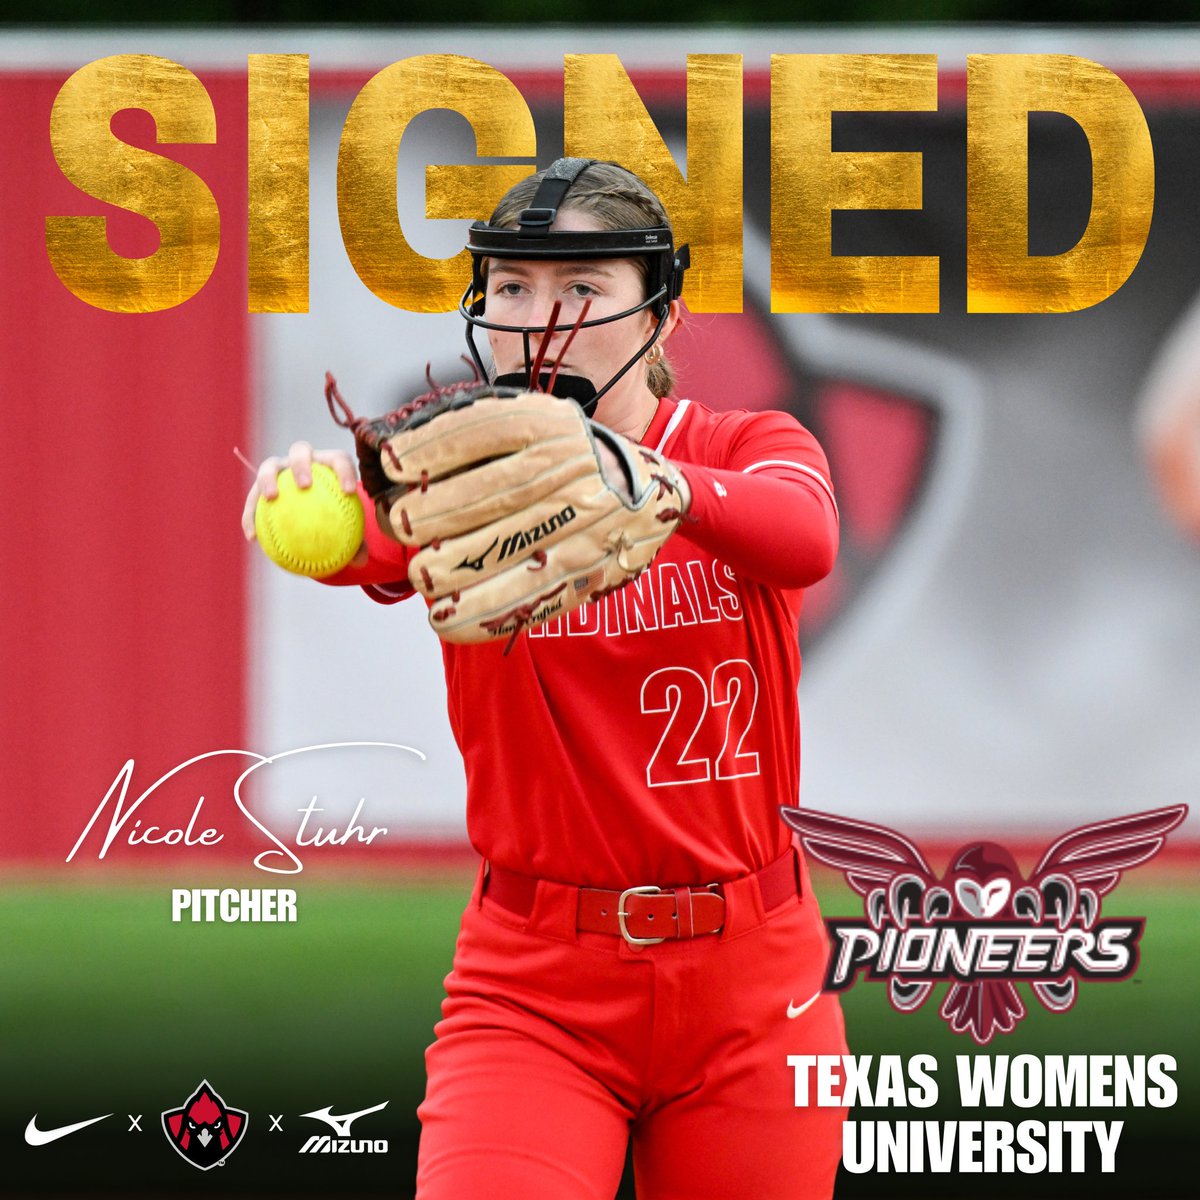 Back to the city she goes, Nicole is continuing her career at Texas Women's University. We are excited to cheer you on as a Pioneer. #CardinalNation | #BirdGang